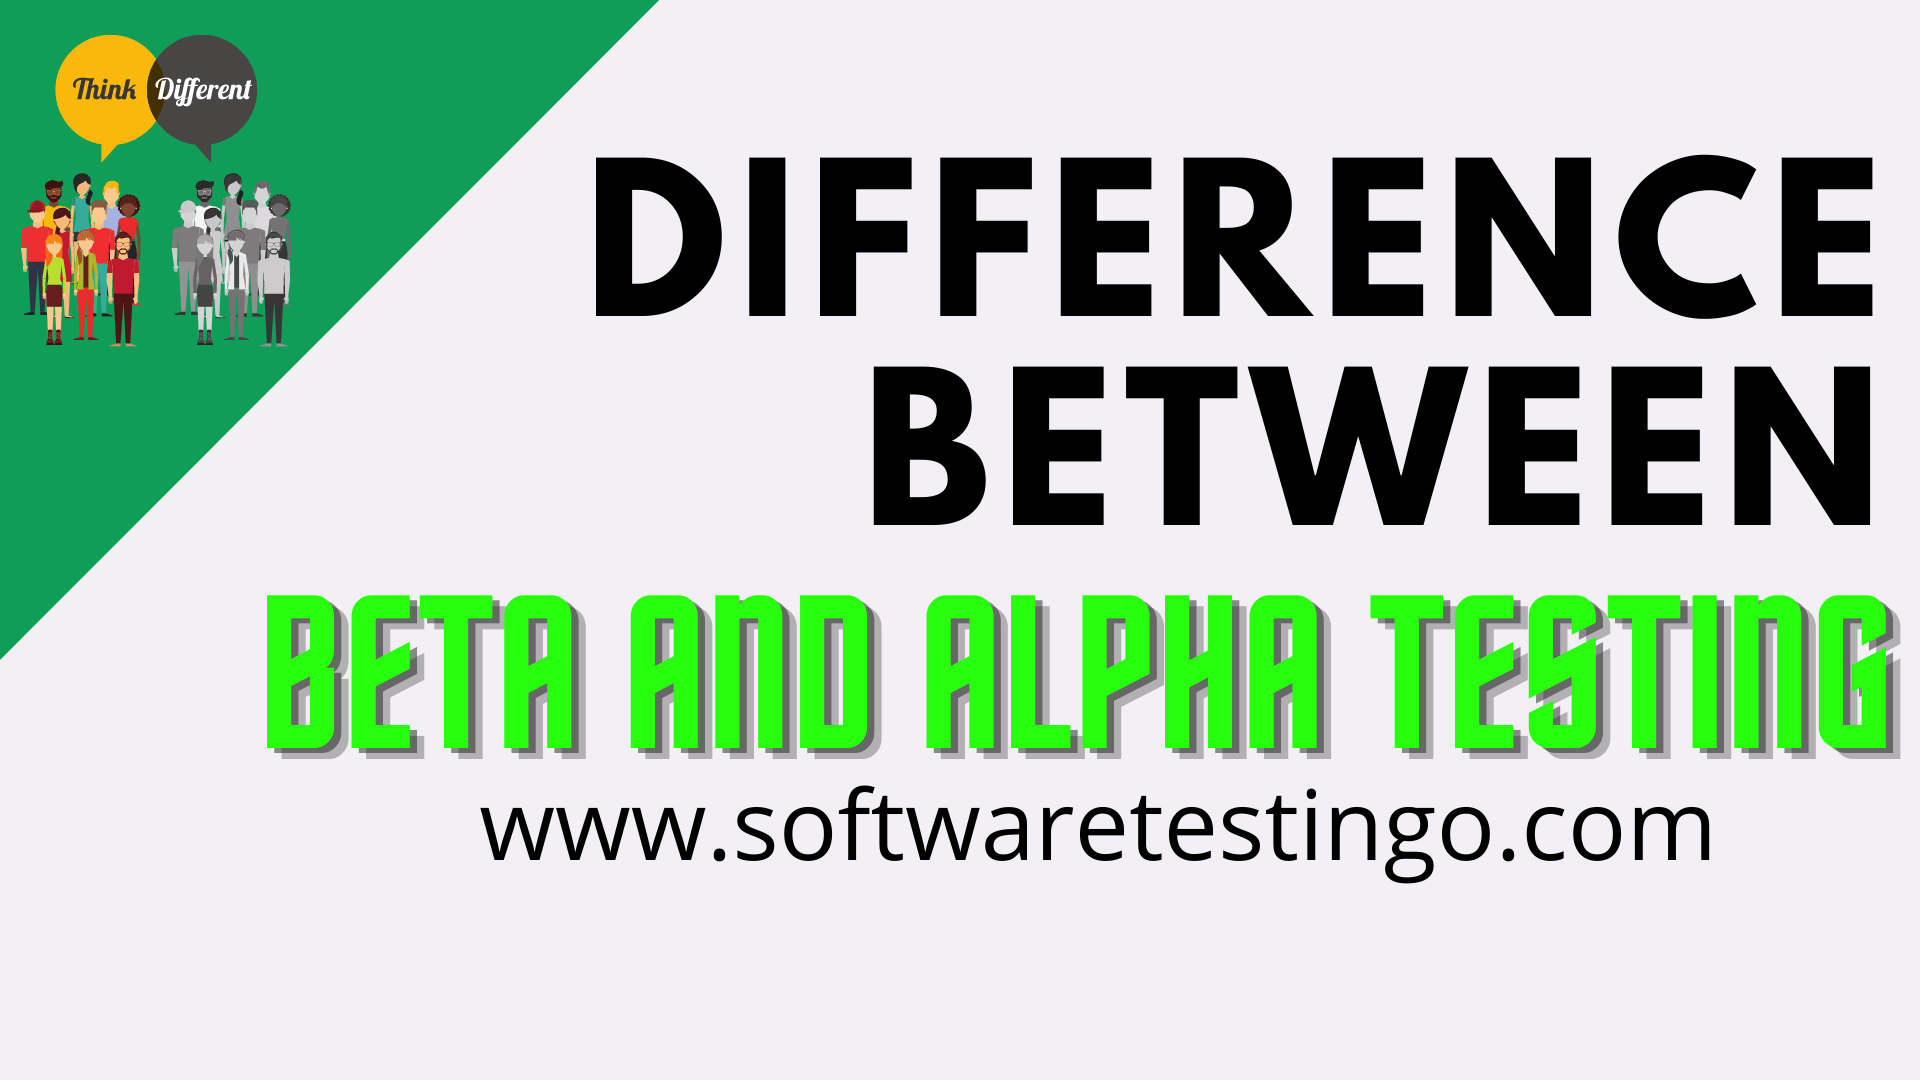 Difference Between Beta and Alpha Testing